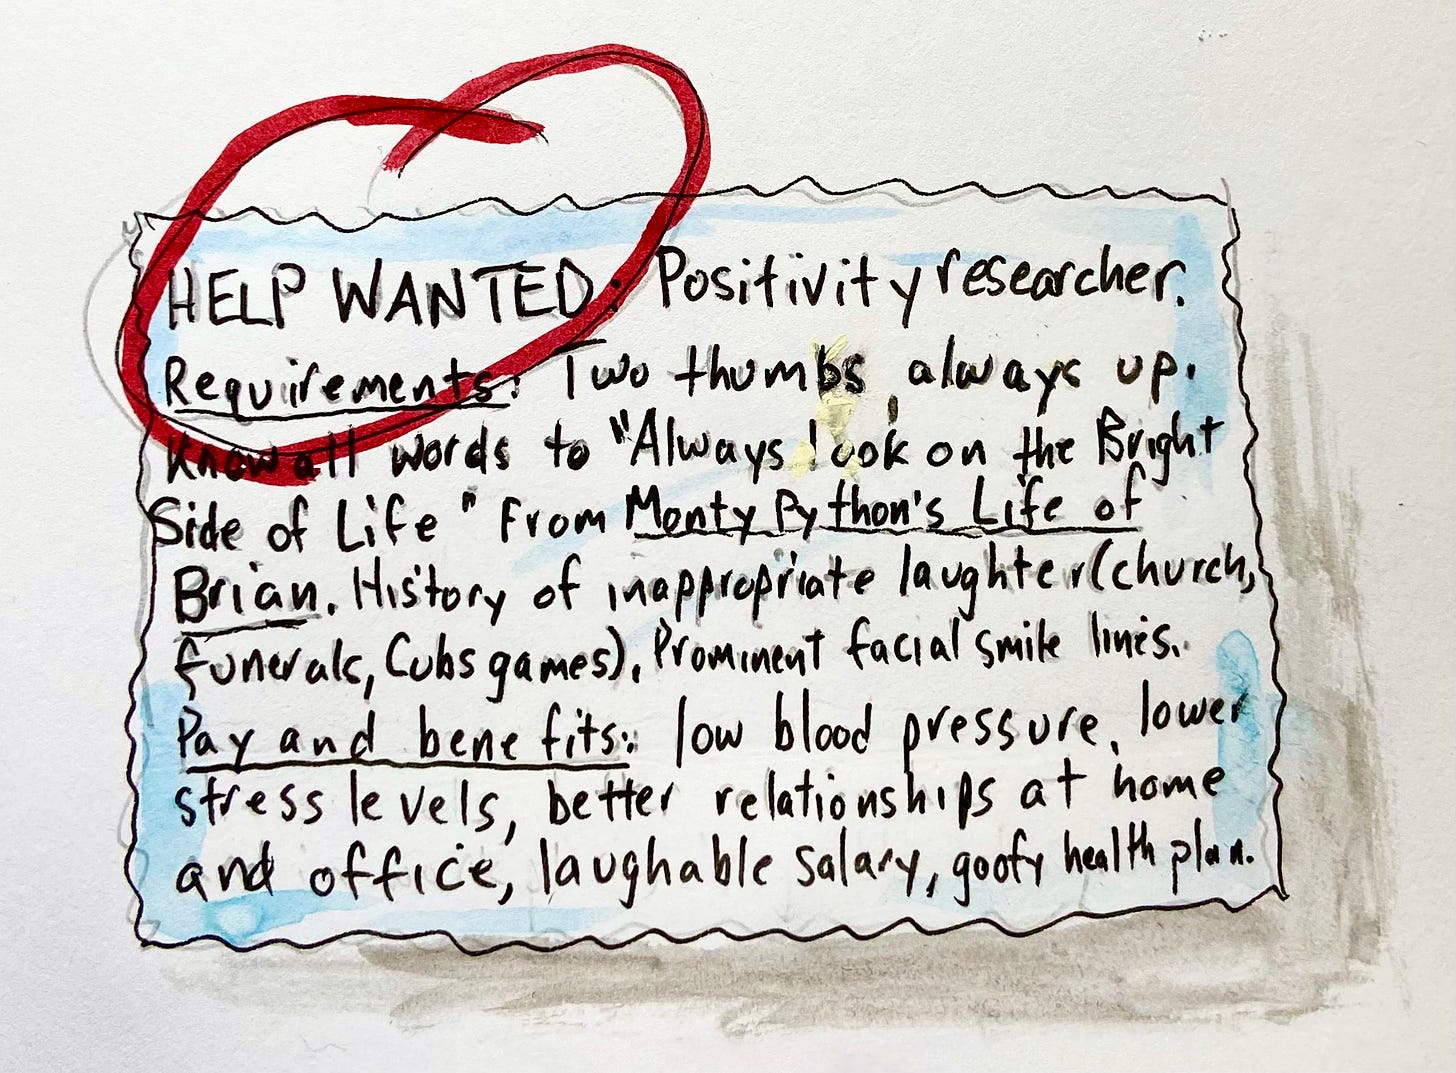 help-wanted ad for positivity researcher